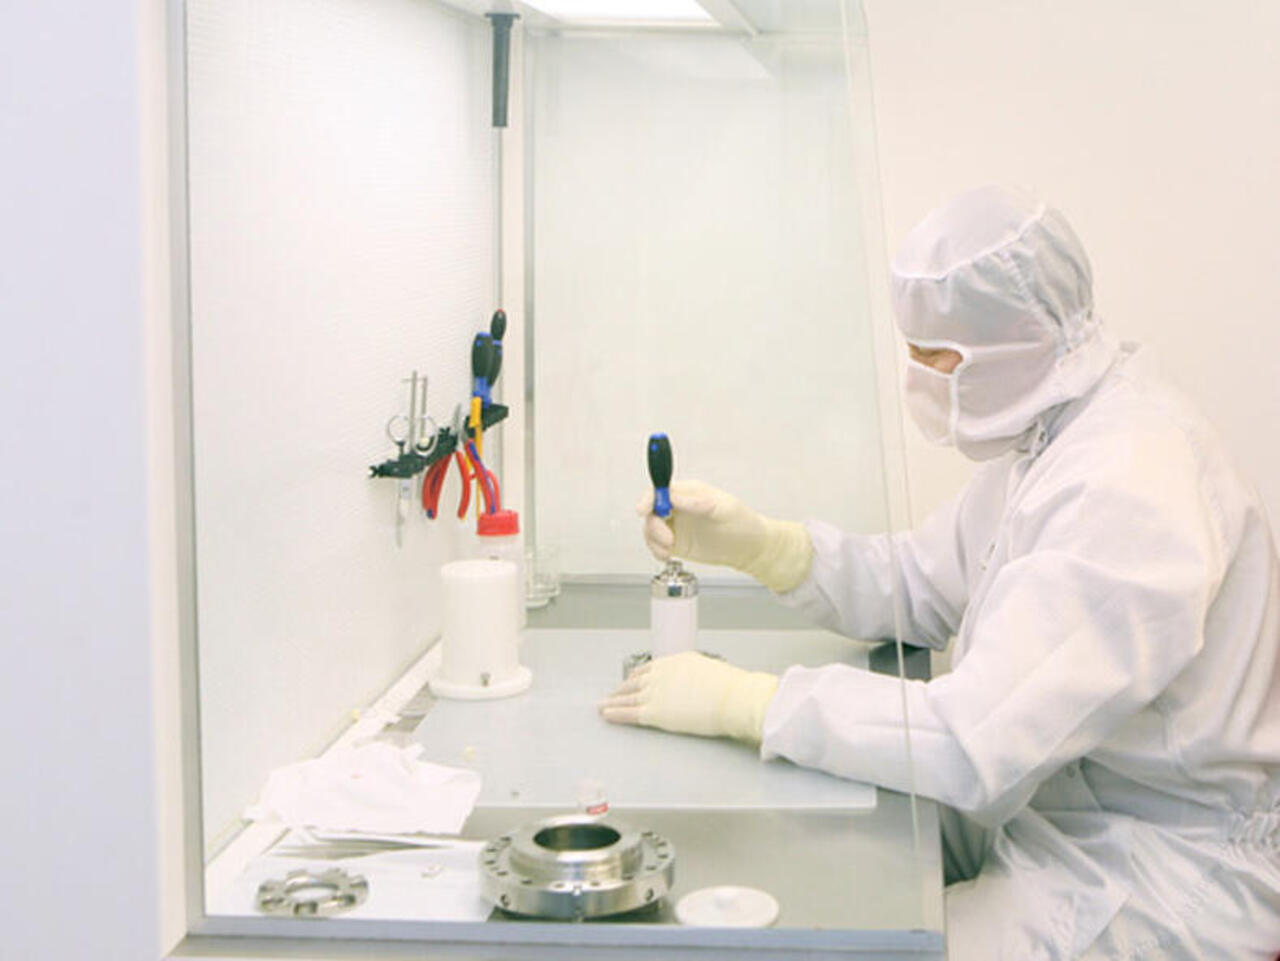 Safety workbench with laboratory technician in front of it in a protective suit working on a sample